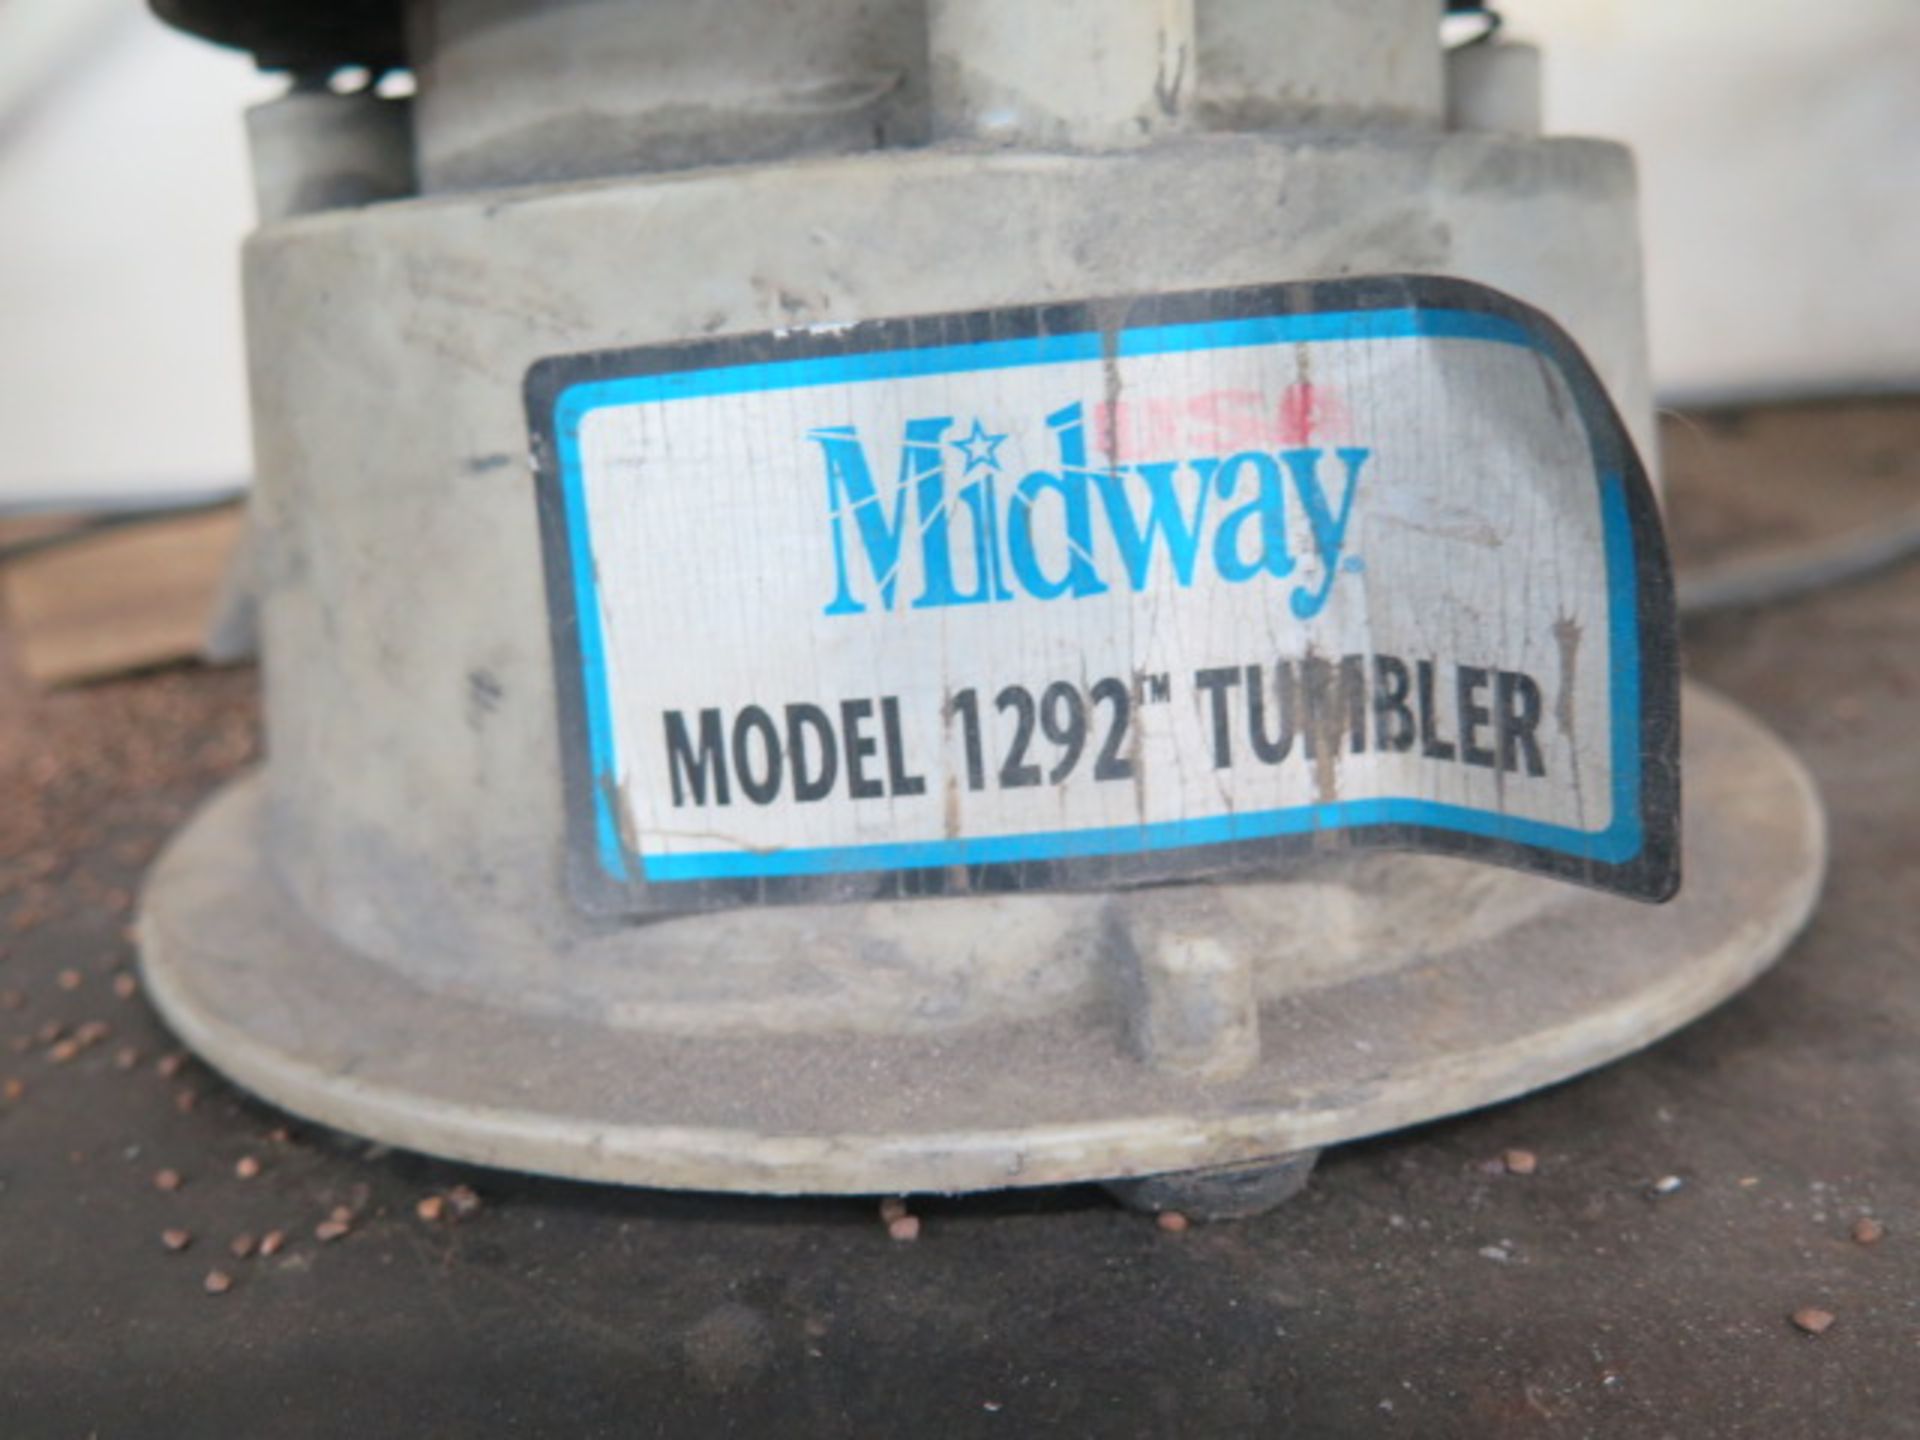 Midway Media Tumbler (SOLD AS-IS - NO WARRANTY) - Image 4 of 4